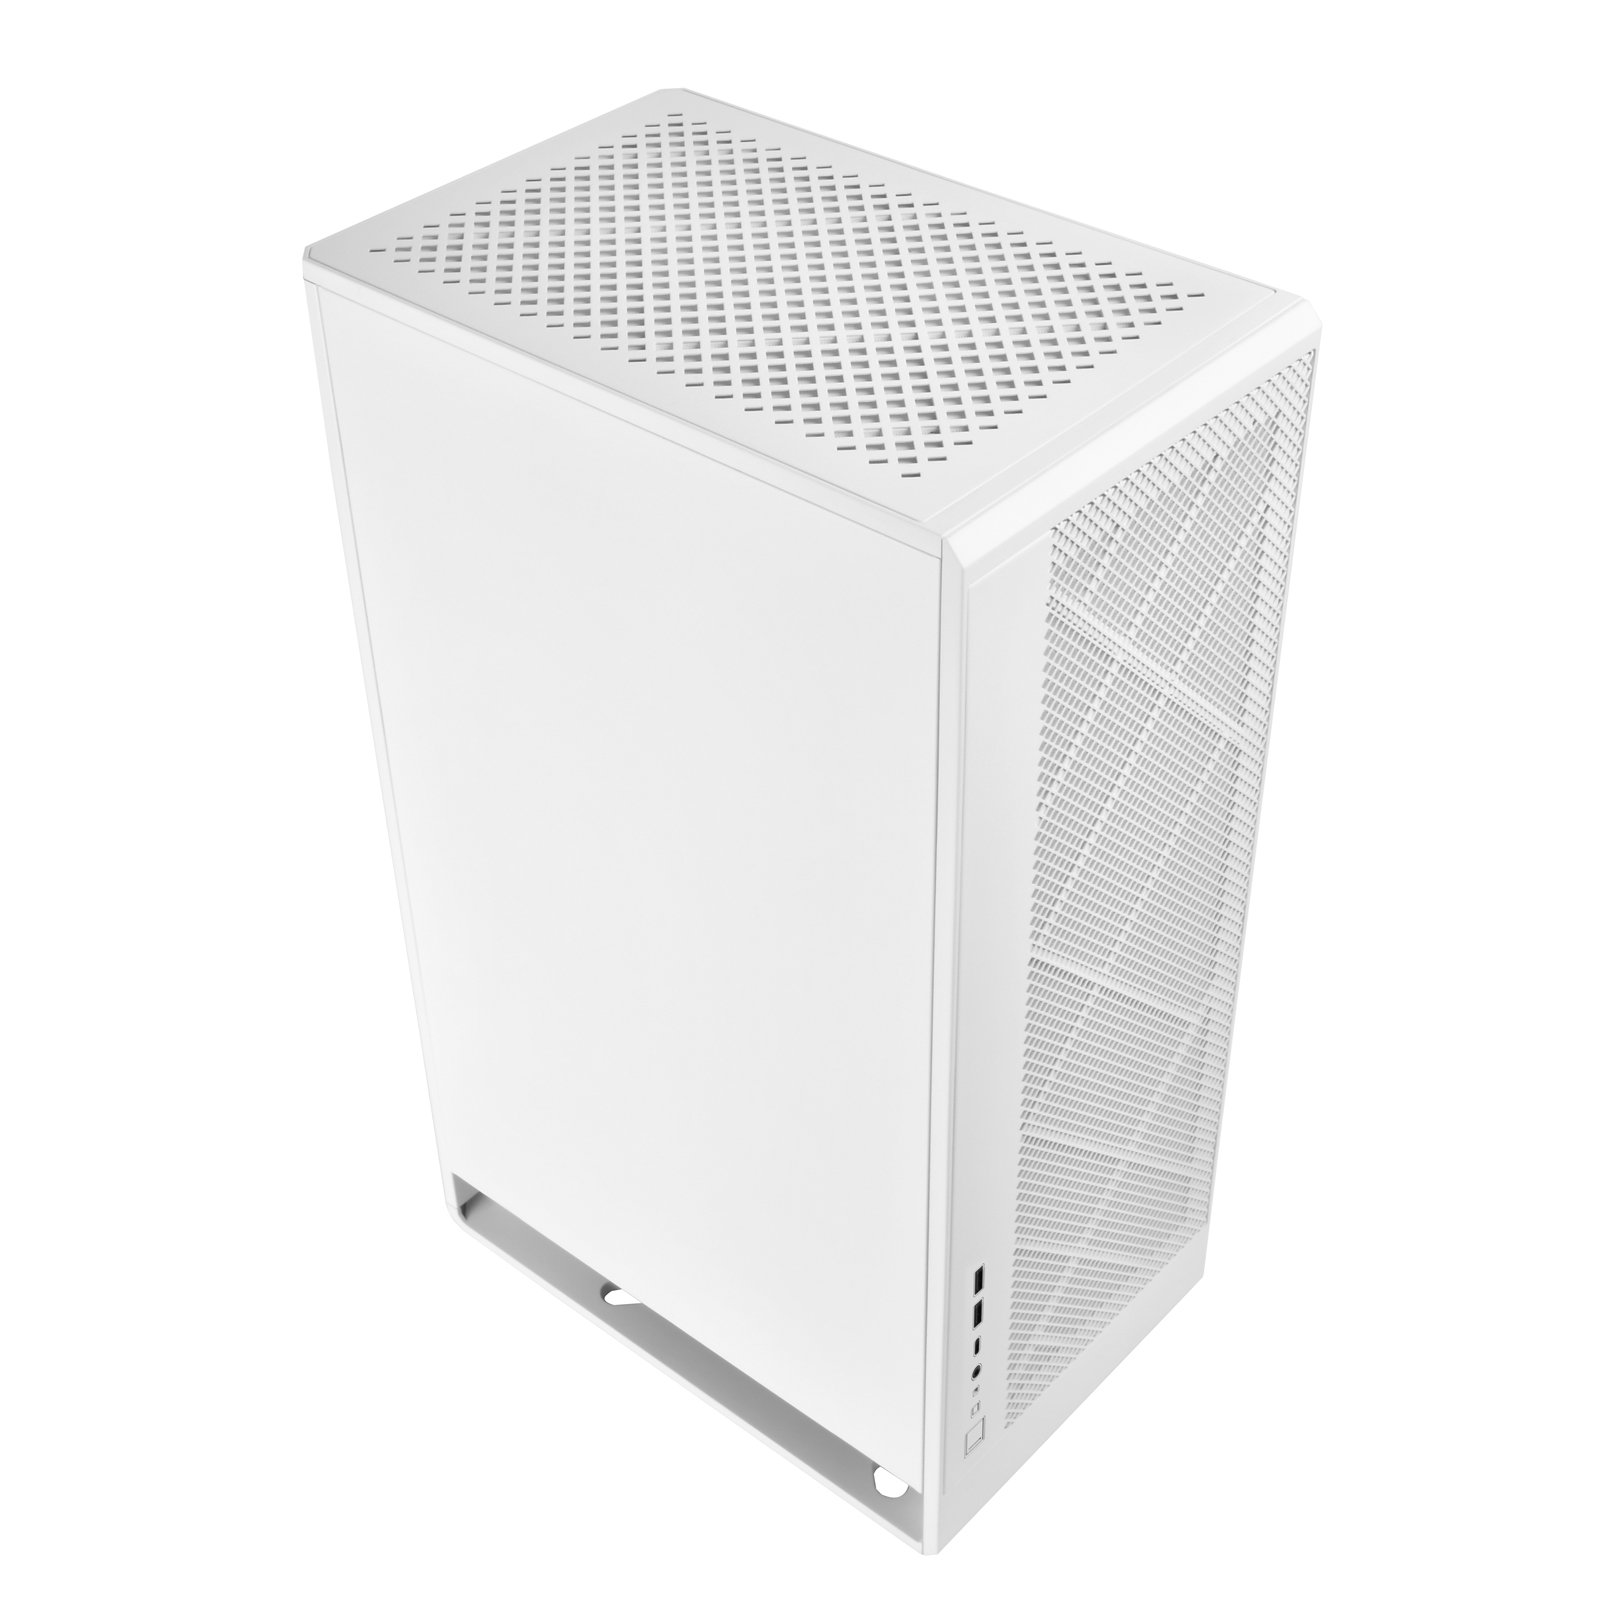 SilverStone Alta G1M is a new vertical Micro-ATX case featuring a stack ...